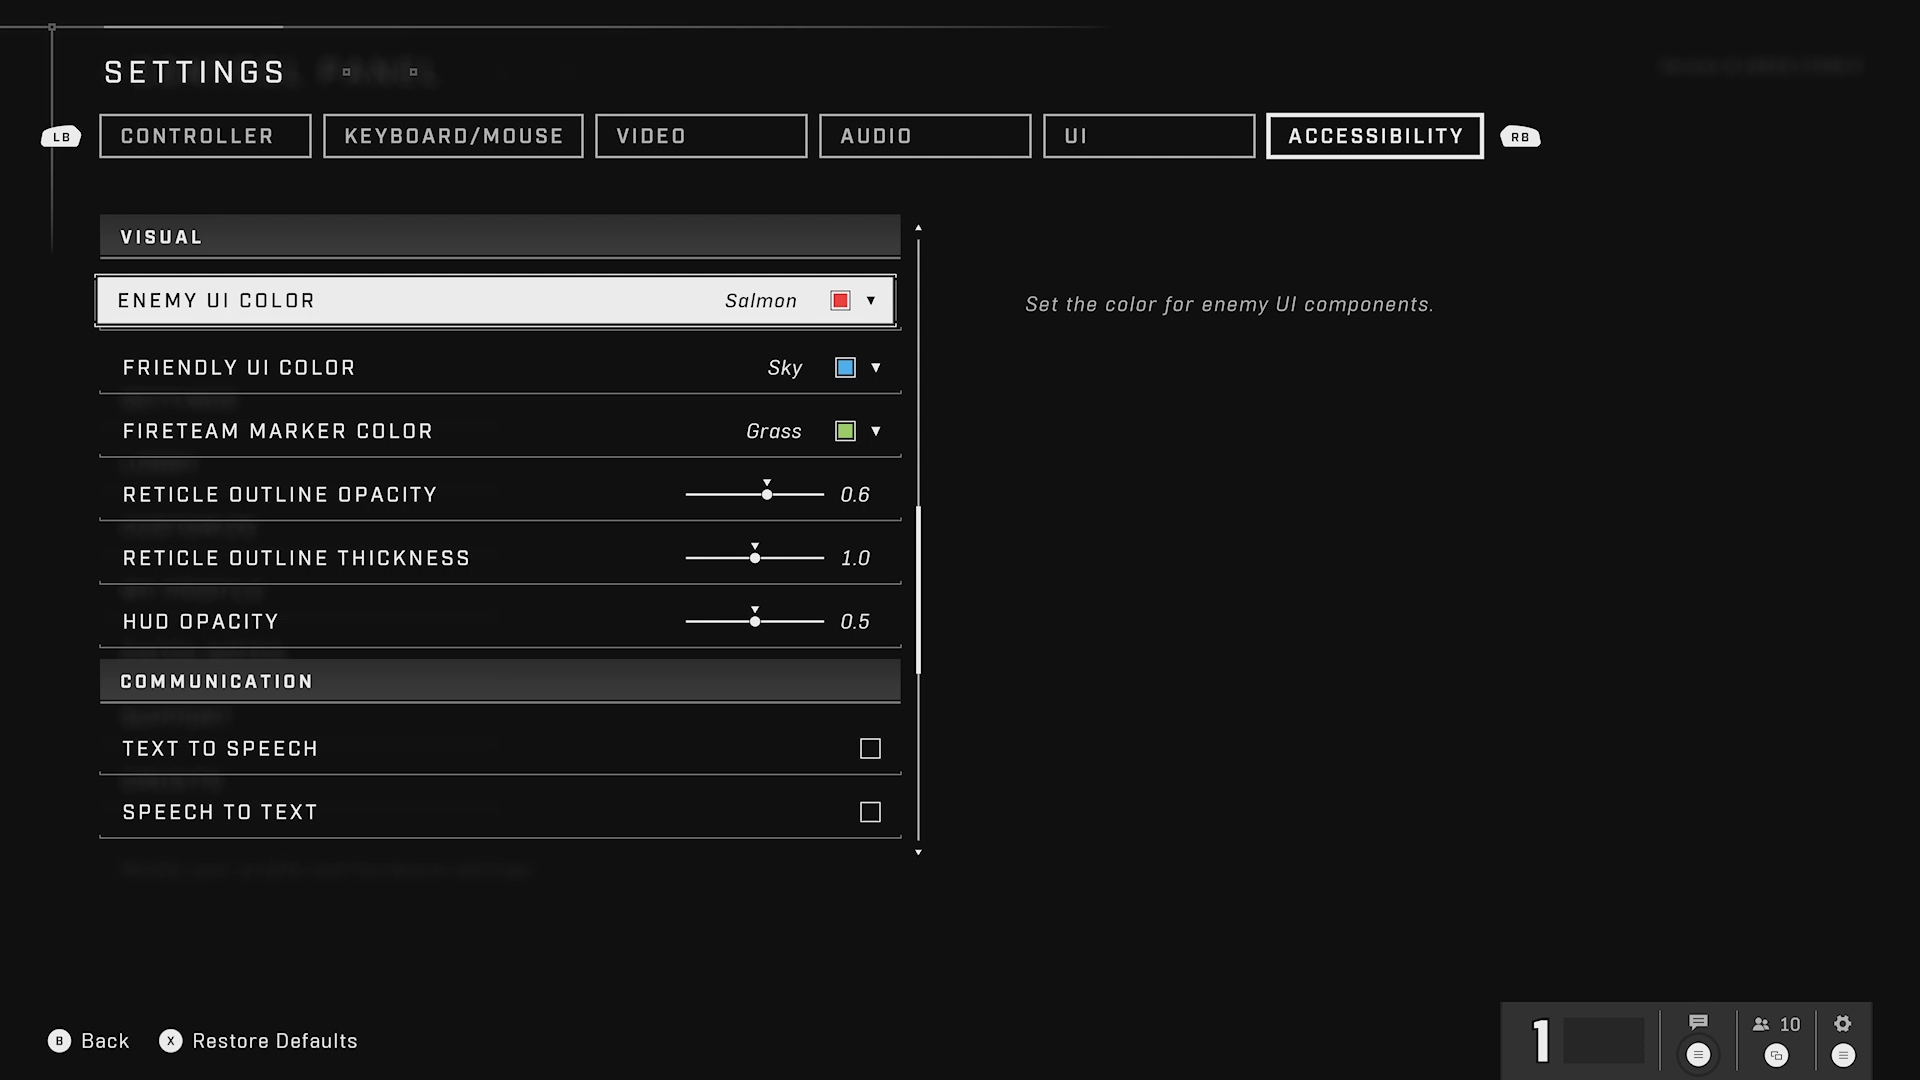 A screenshot that shows the Halo 5 Accessibility menu. Under the Visual tab, the player can choose from various colors for the enemy UI color, friendly UI color, and fire team marker color options.